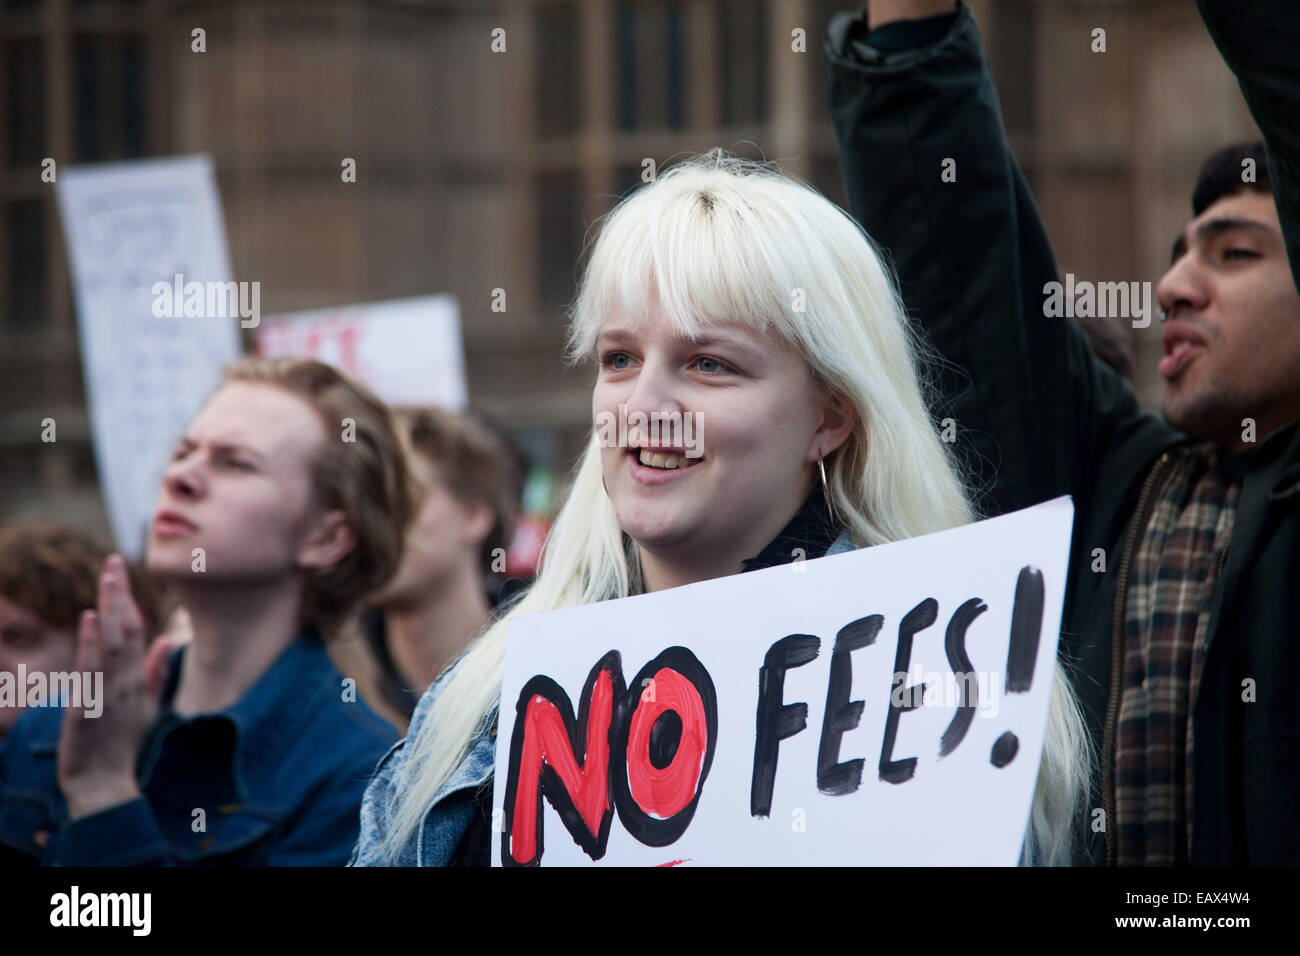 A young woman with a placard calling for No Fee cheers the speaker at the rally, Caroline Lucas MP. Stock Photo